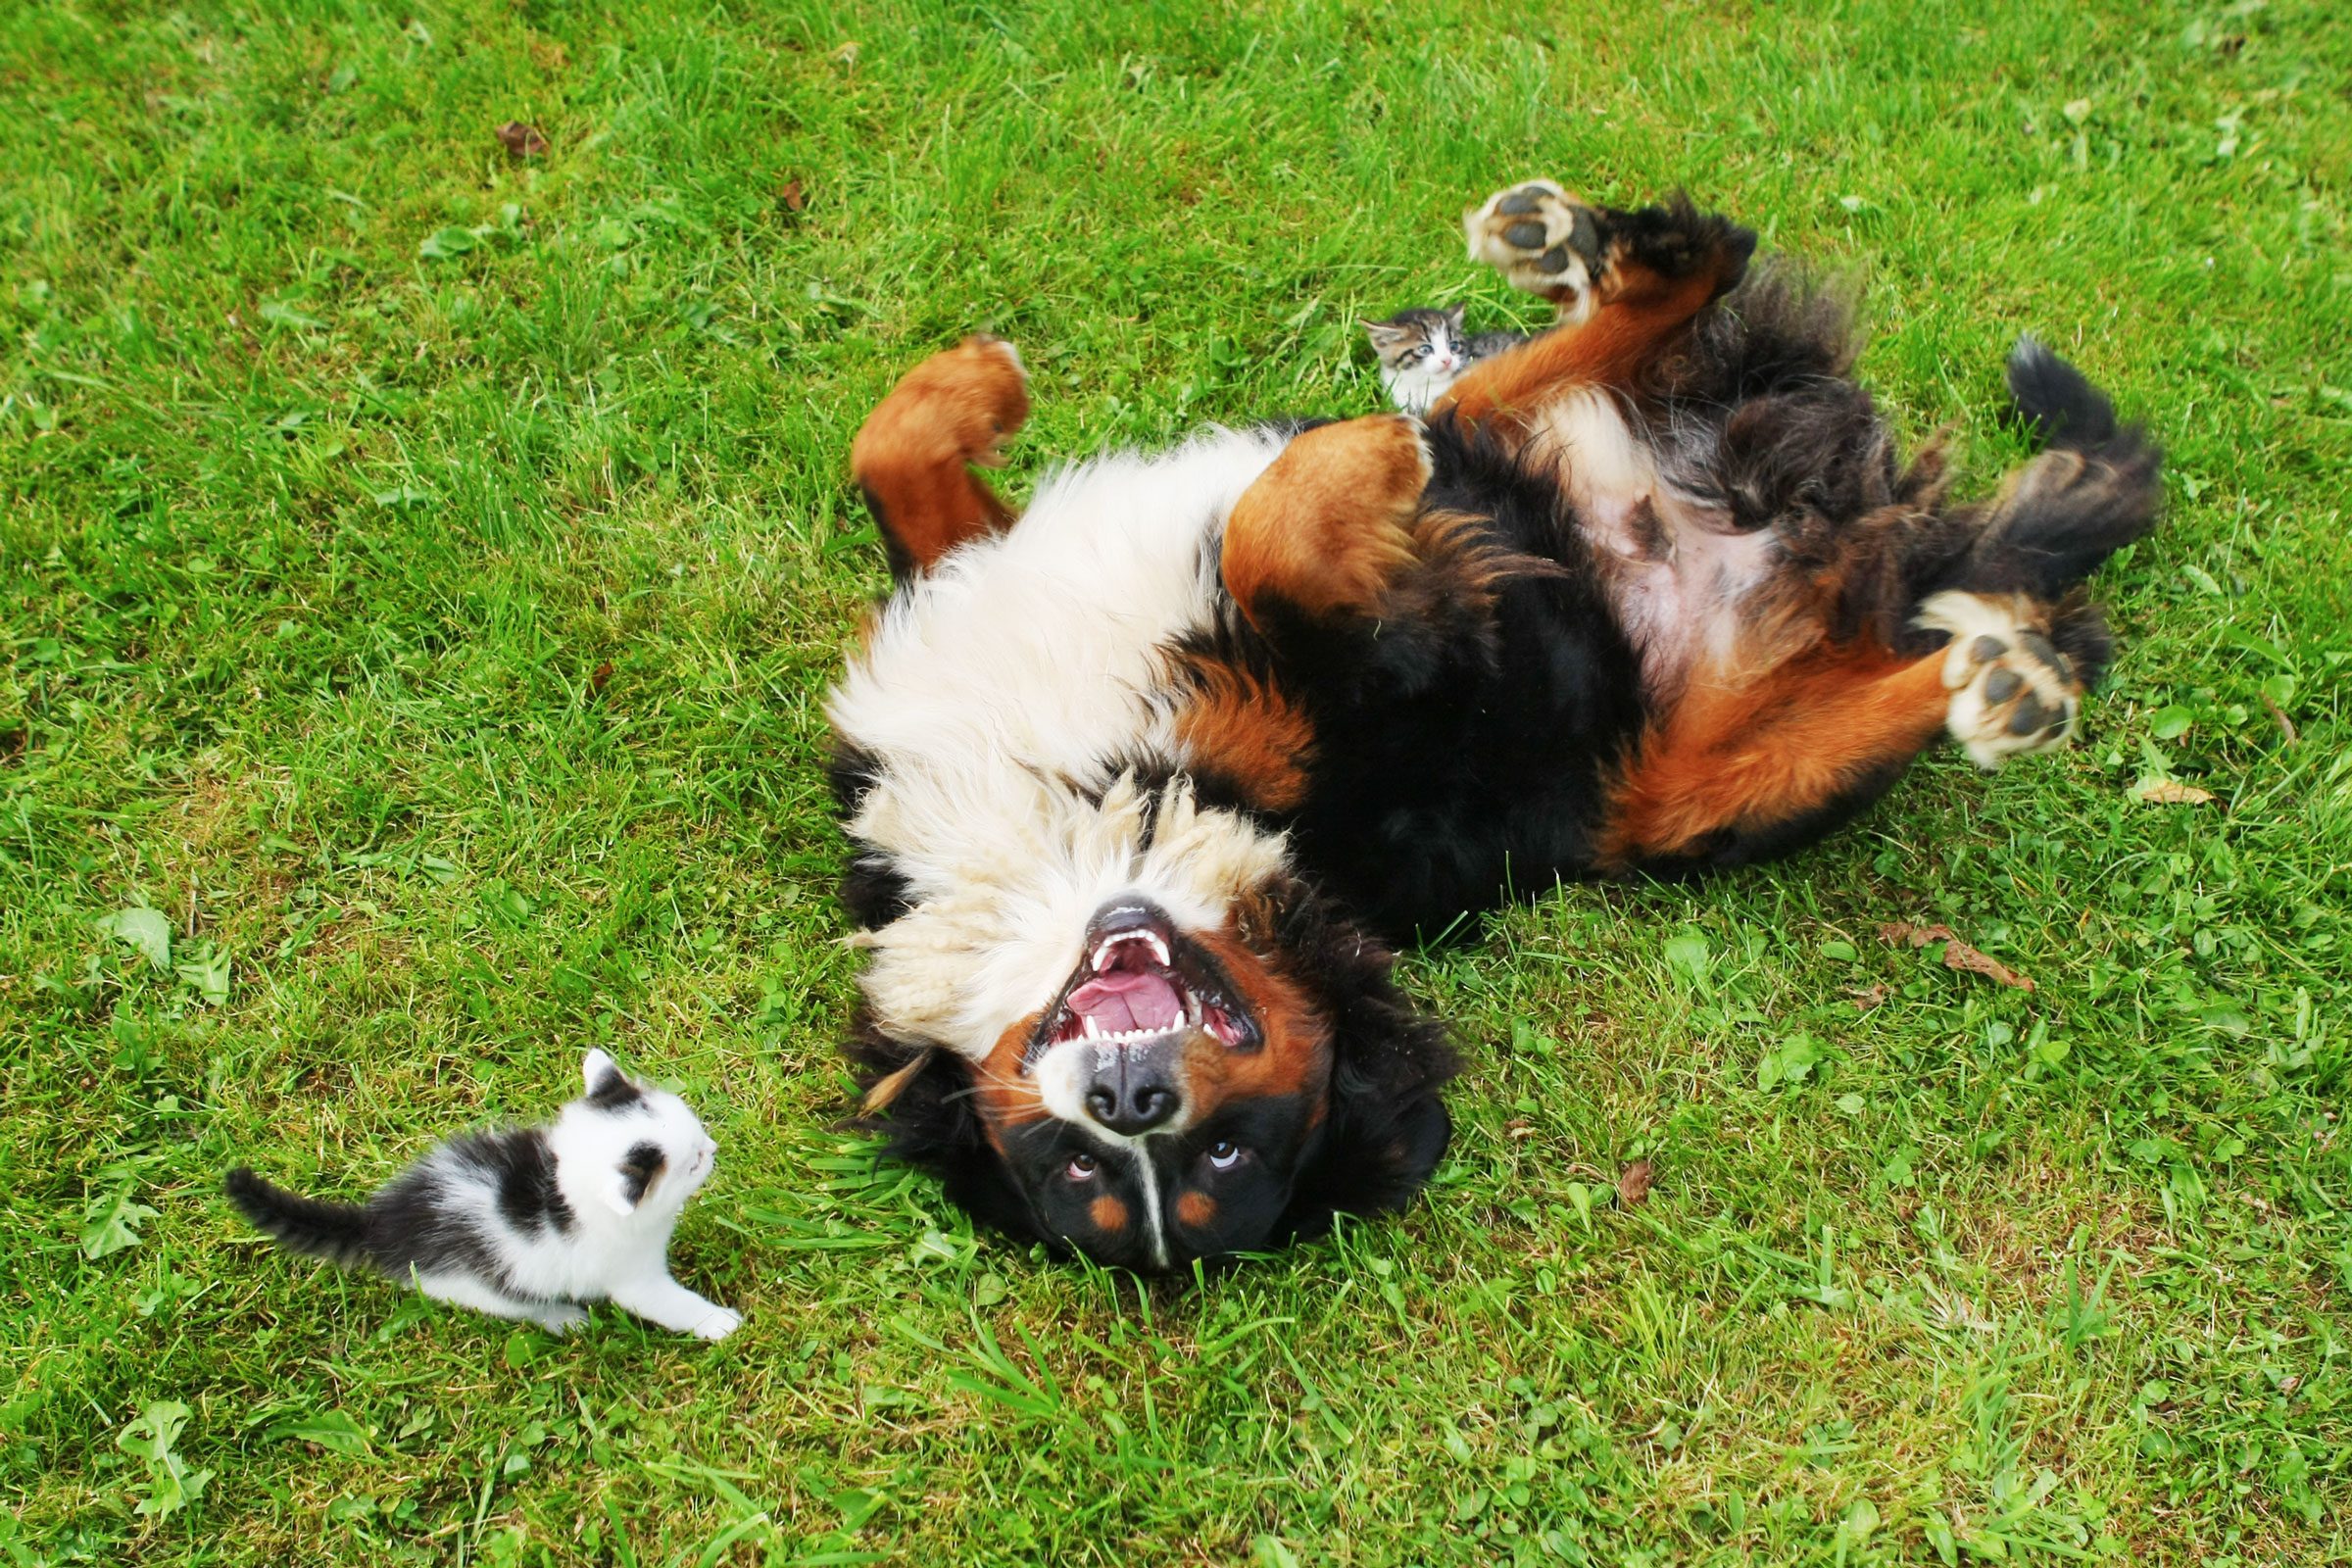 Bernese mountain dog and cat friend